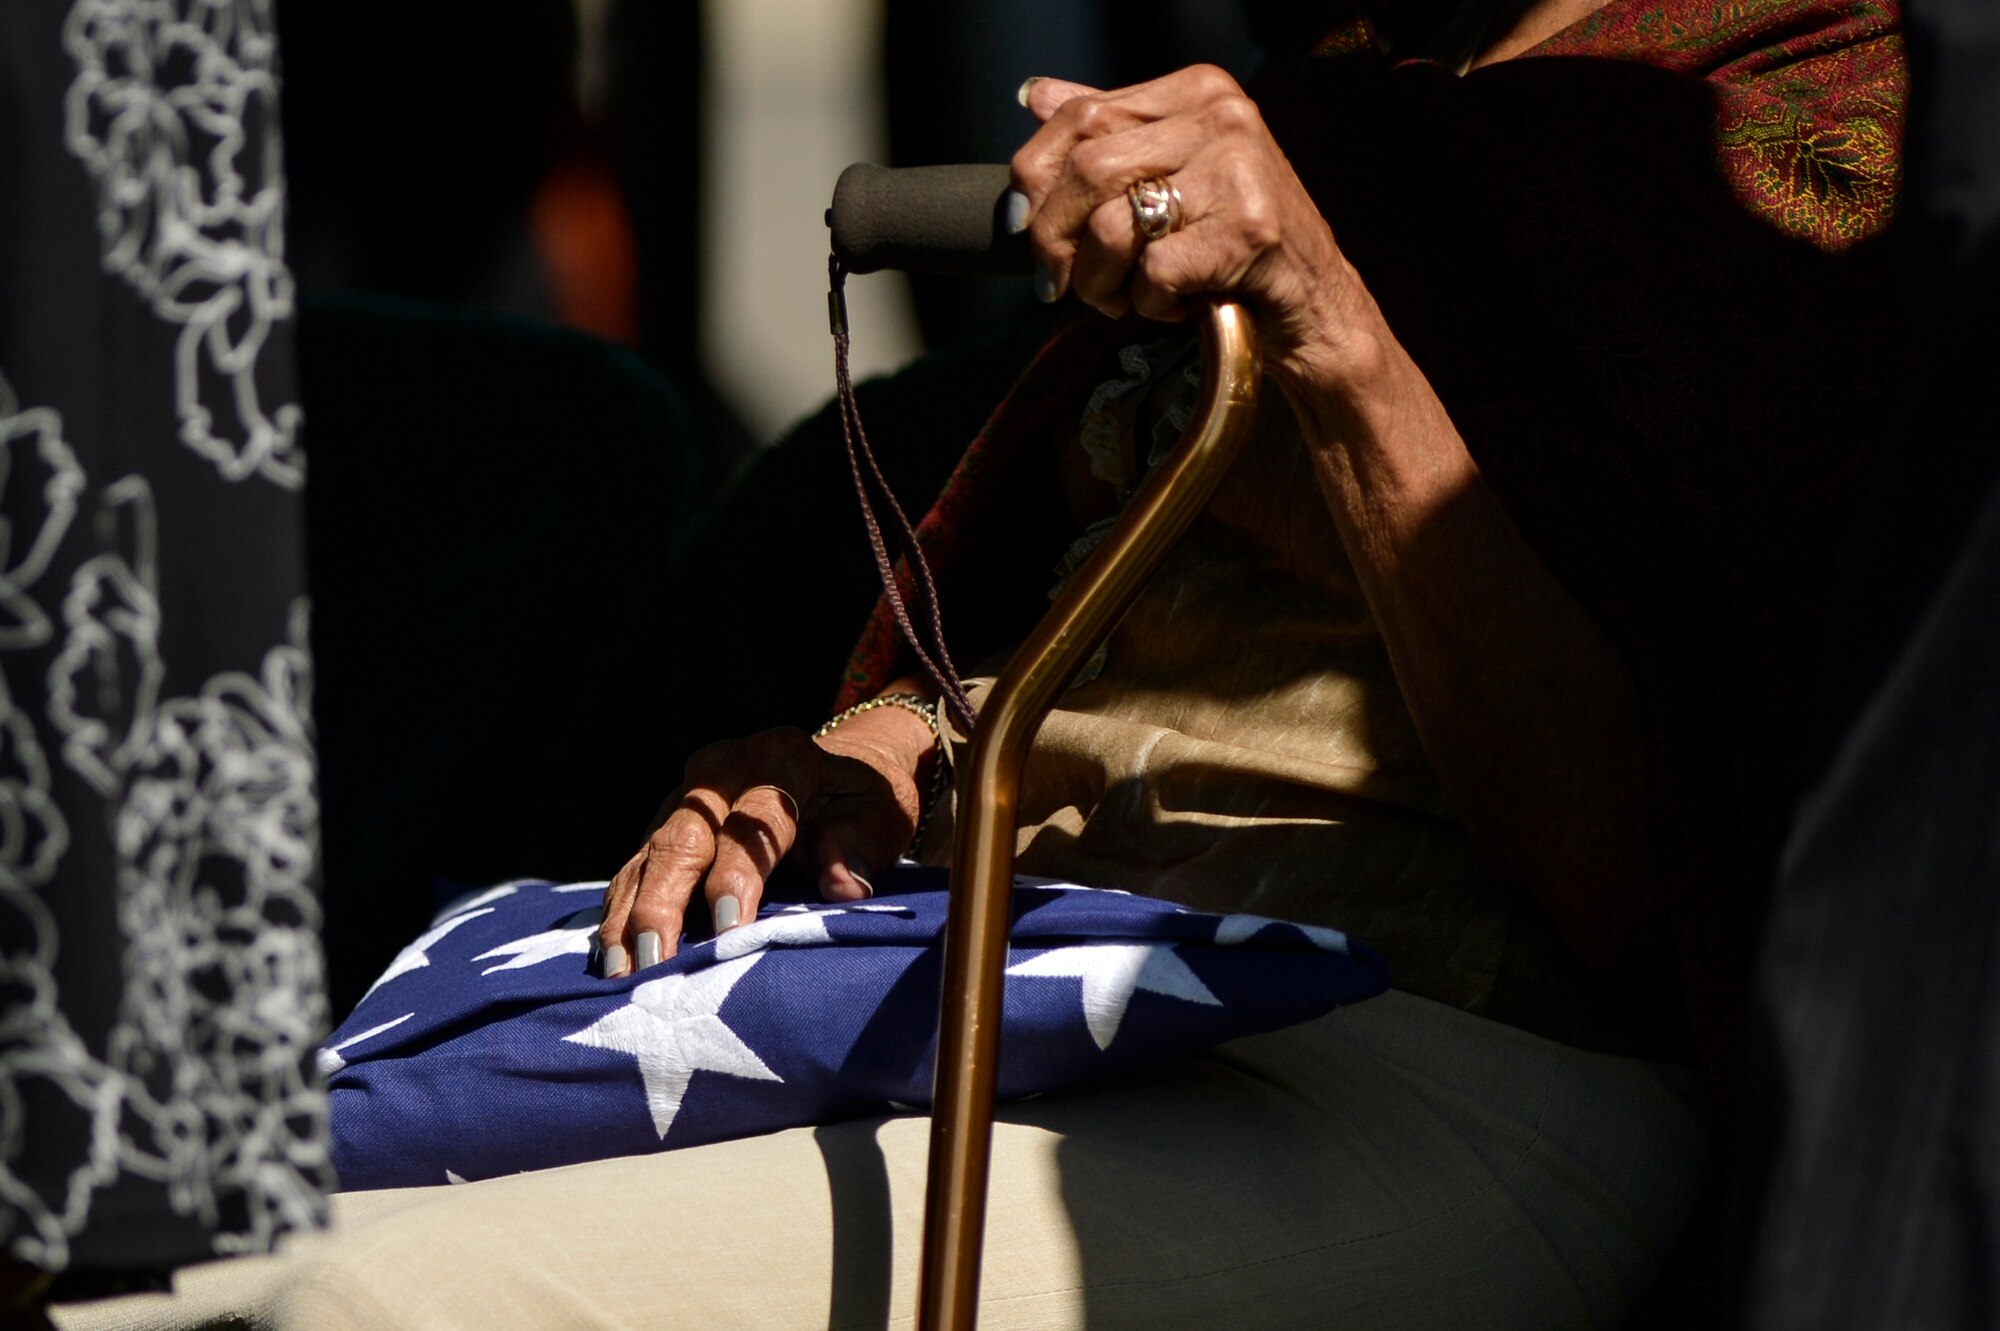 Nola Whitfield embraces her husband’s flag during the graveside ceremony honoring former 2nd Lt. Malvin G. Whitfield, an Army Air Forces and Air Force veteran, at Arlington National Cemetery, Va., June 8, 2016. Whitfield later served as a youth and sports affairs officer for the U.S. Information Agency where he traveled to more than 132 countries and played a key role in training and developing African athletes. (U.S. Air Force photo/Tech. Sgt. Joshua L. DeMotts)